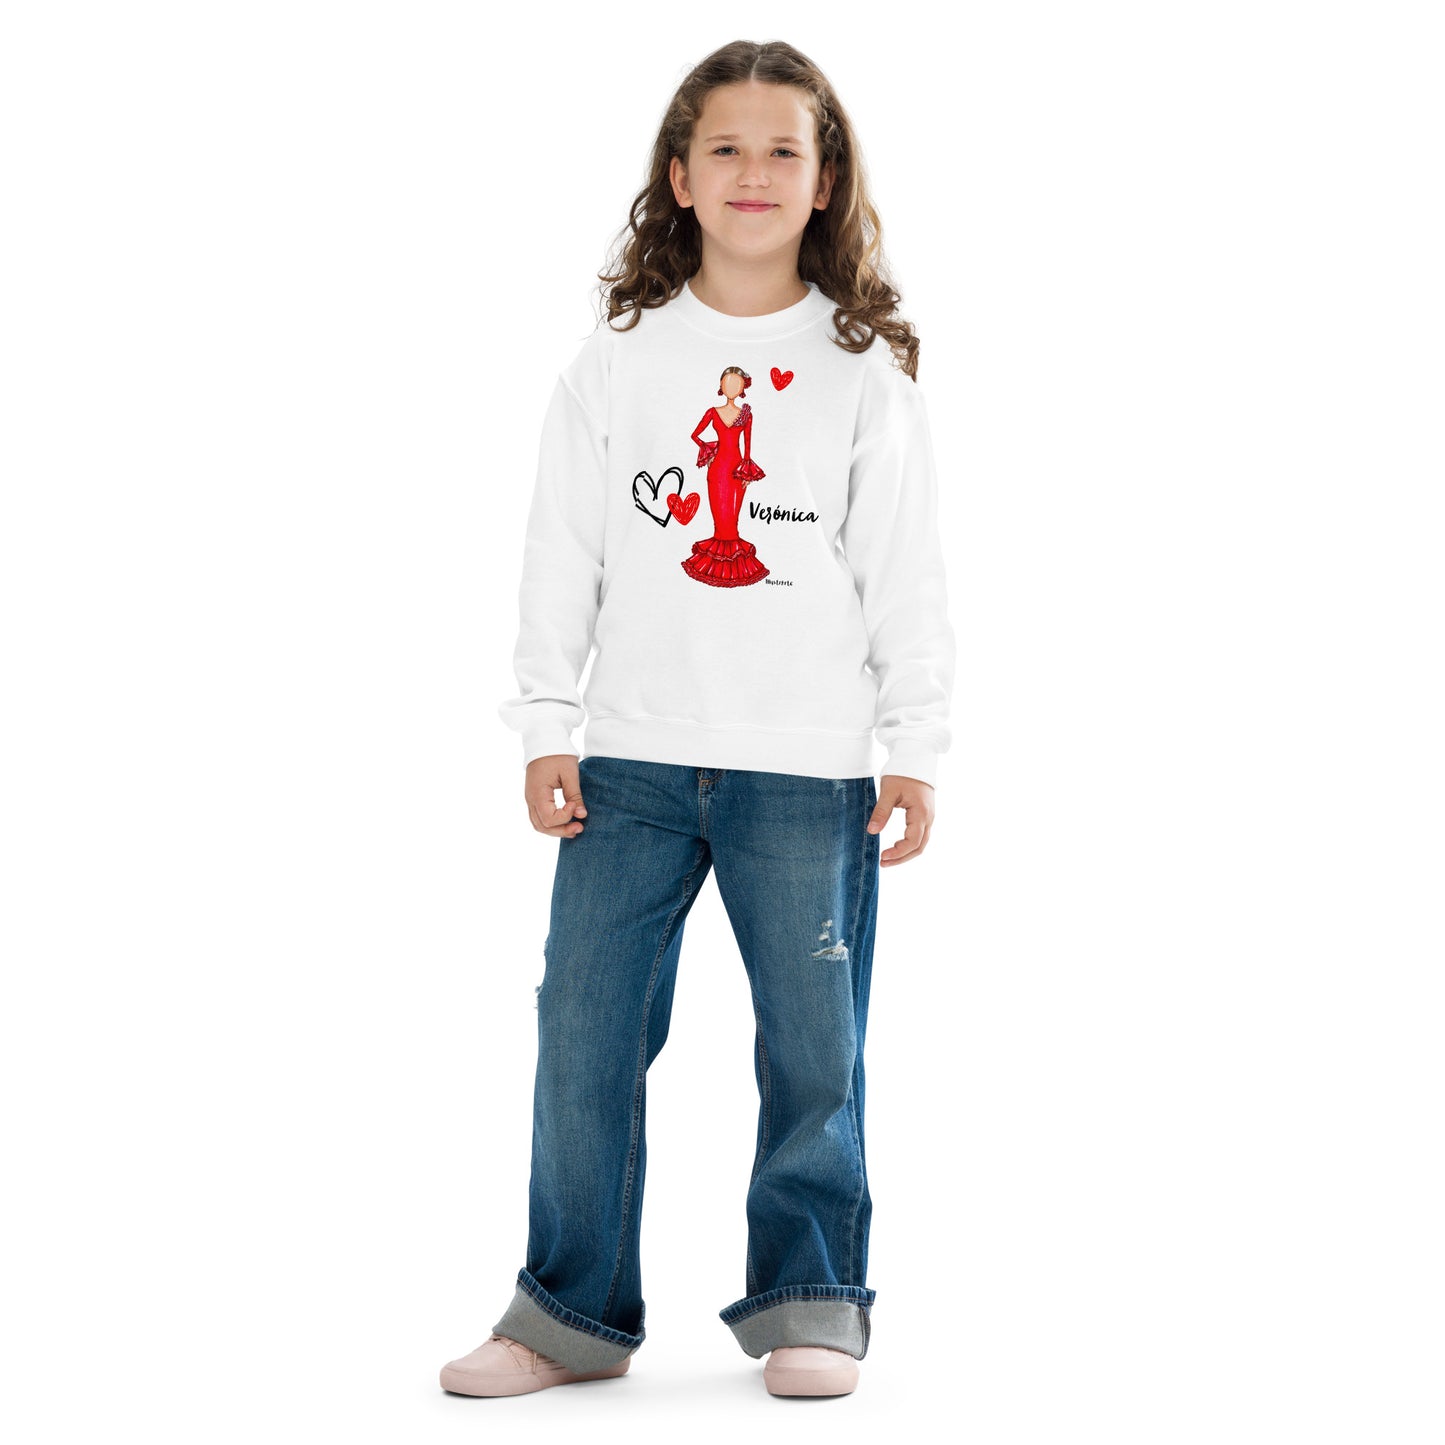 a little girl wearing a white sweater with a red heart on it